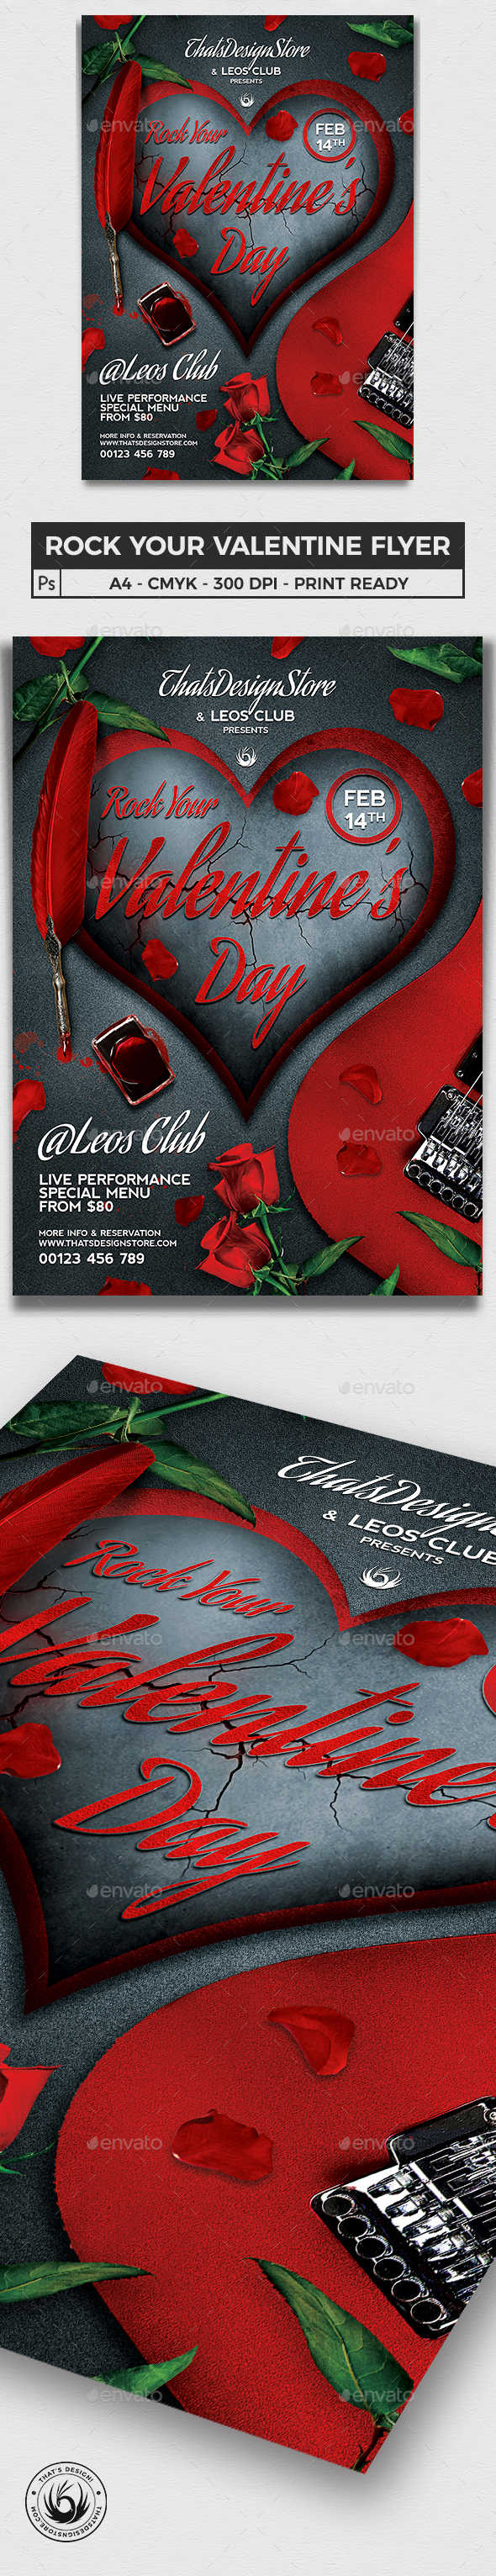 Rock Your Valentine Flyer Template